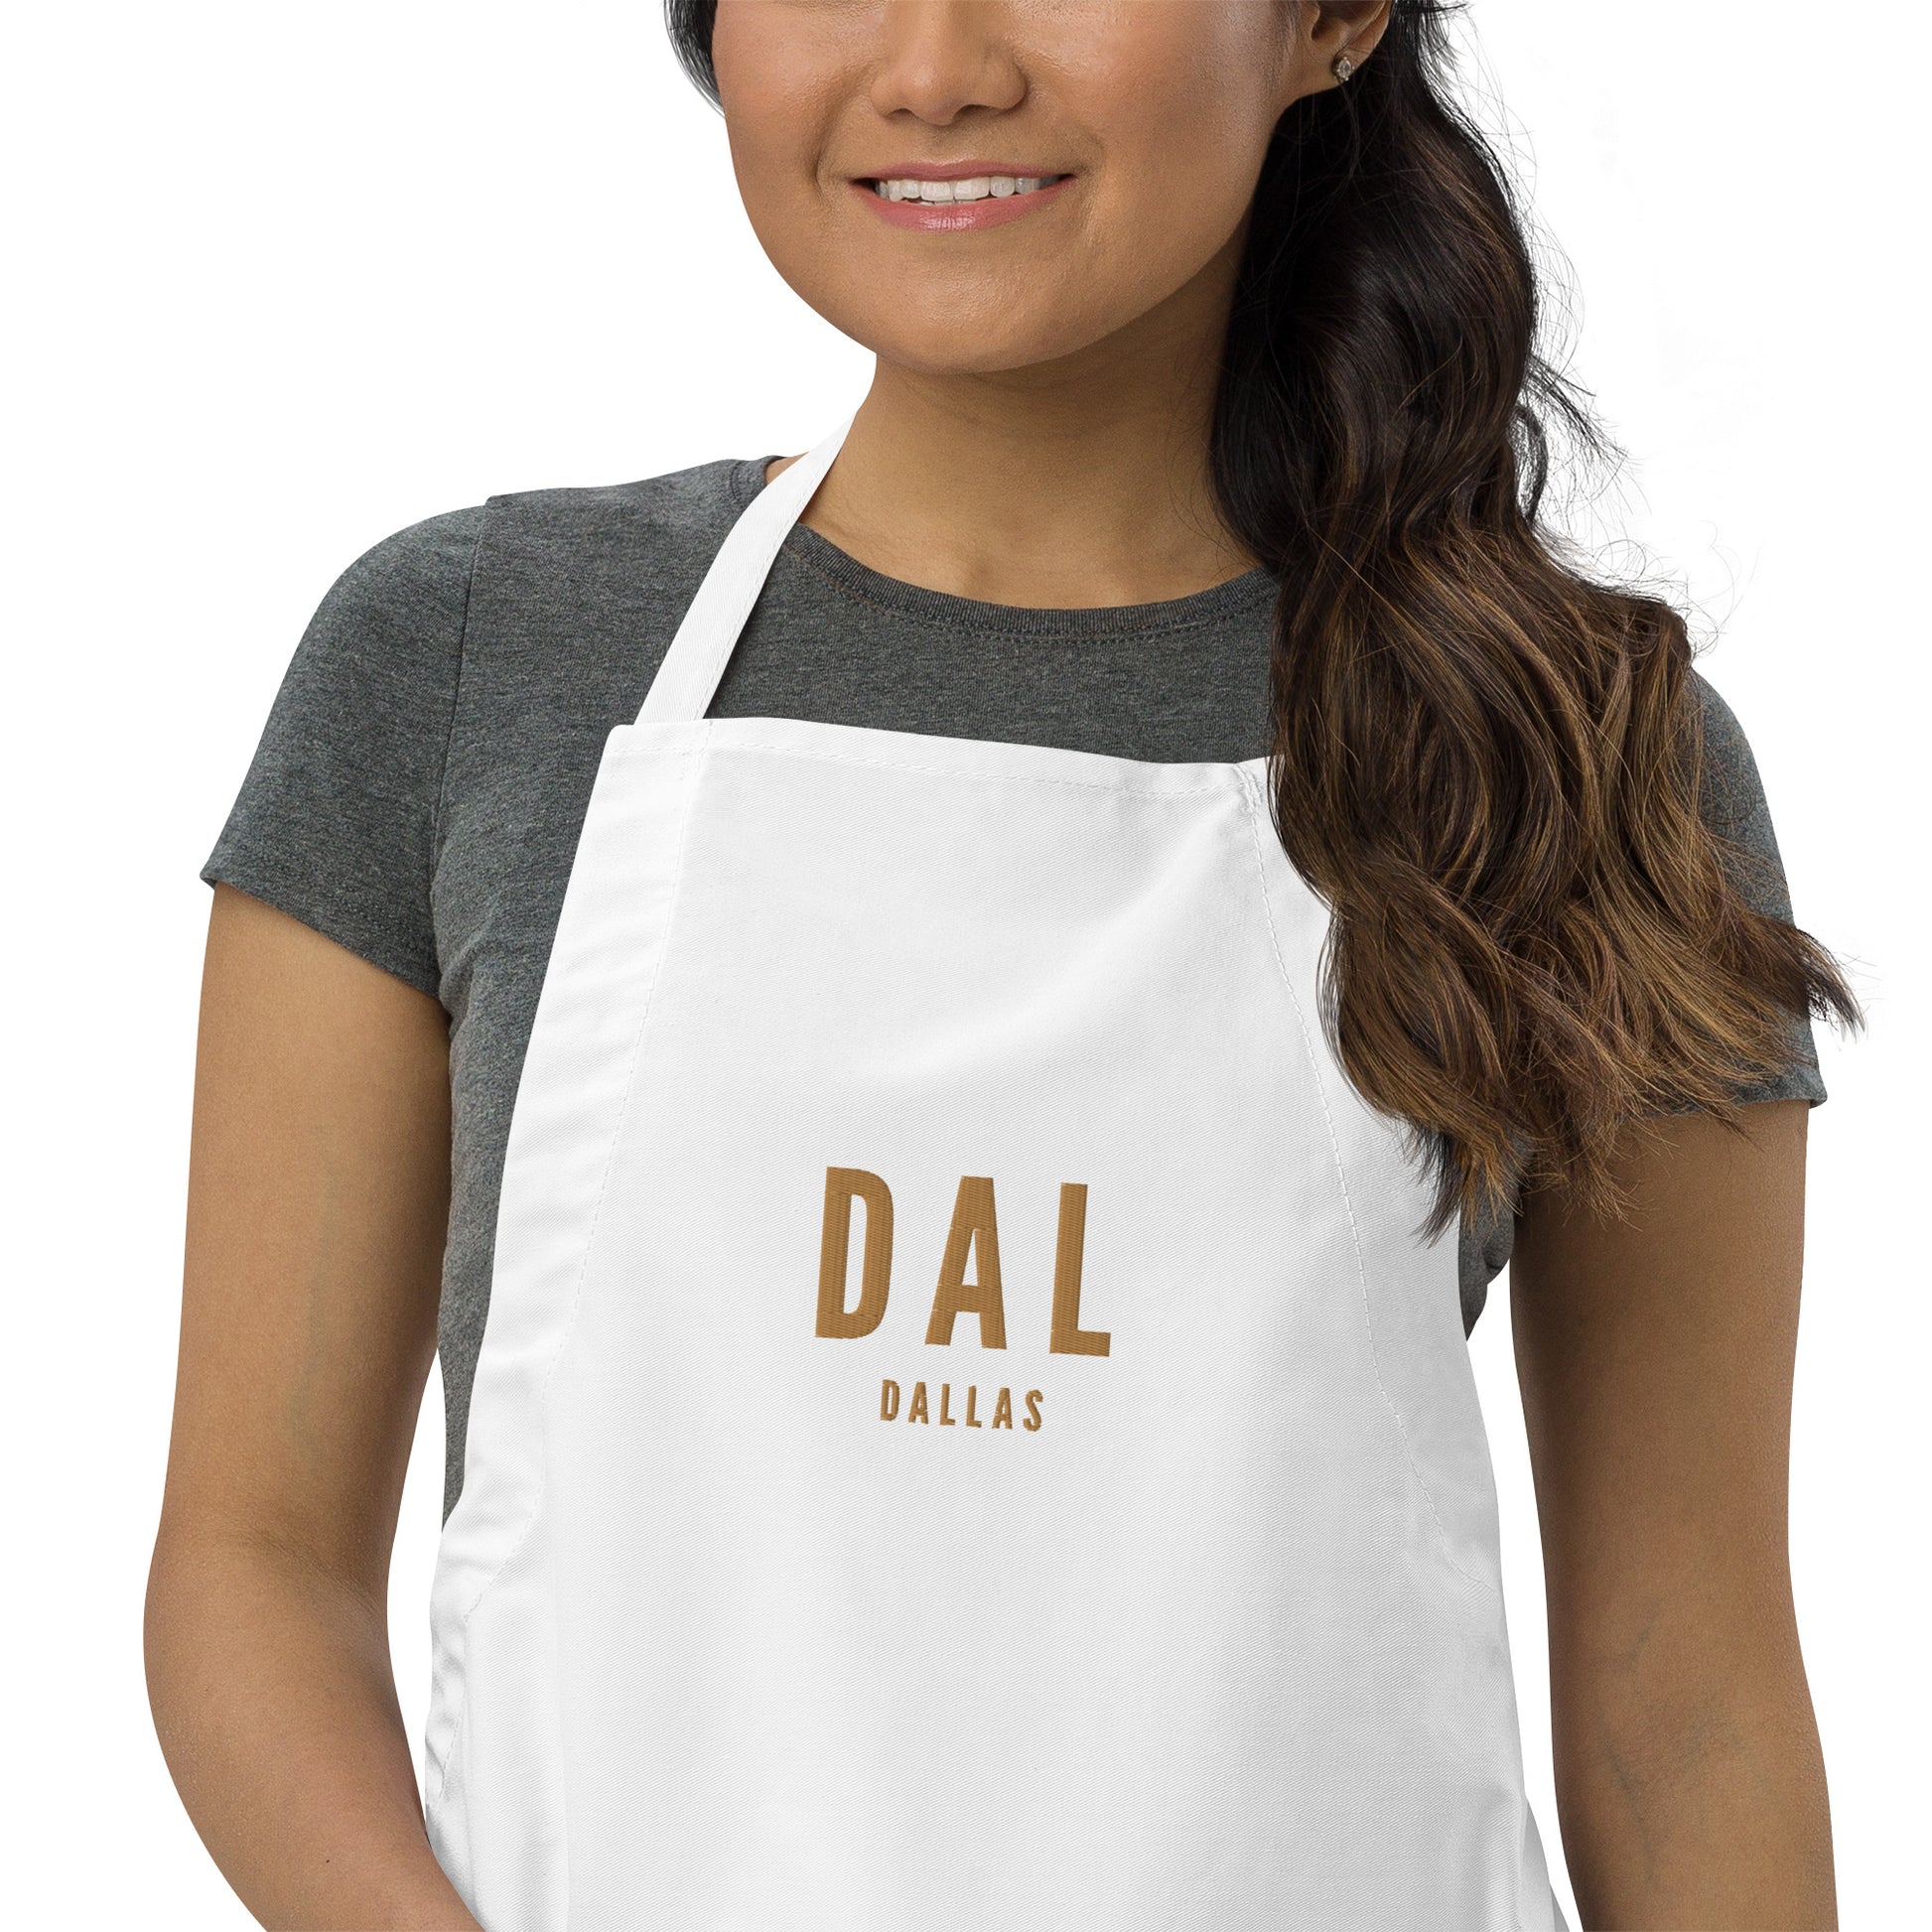 City Embroidered Apron - Old Gold • DAL Dallas • YHM Designs - Image 08